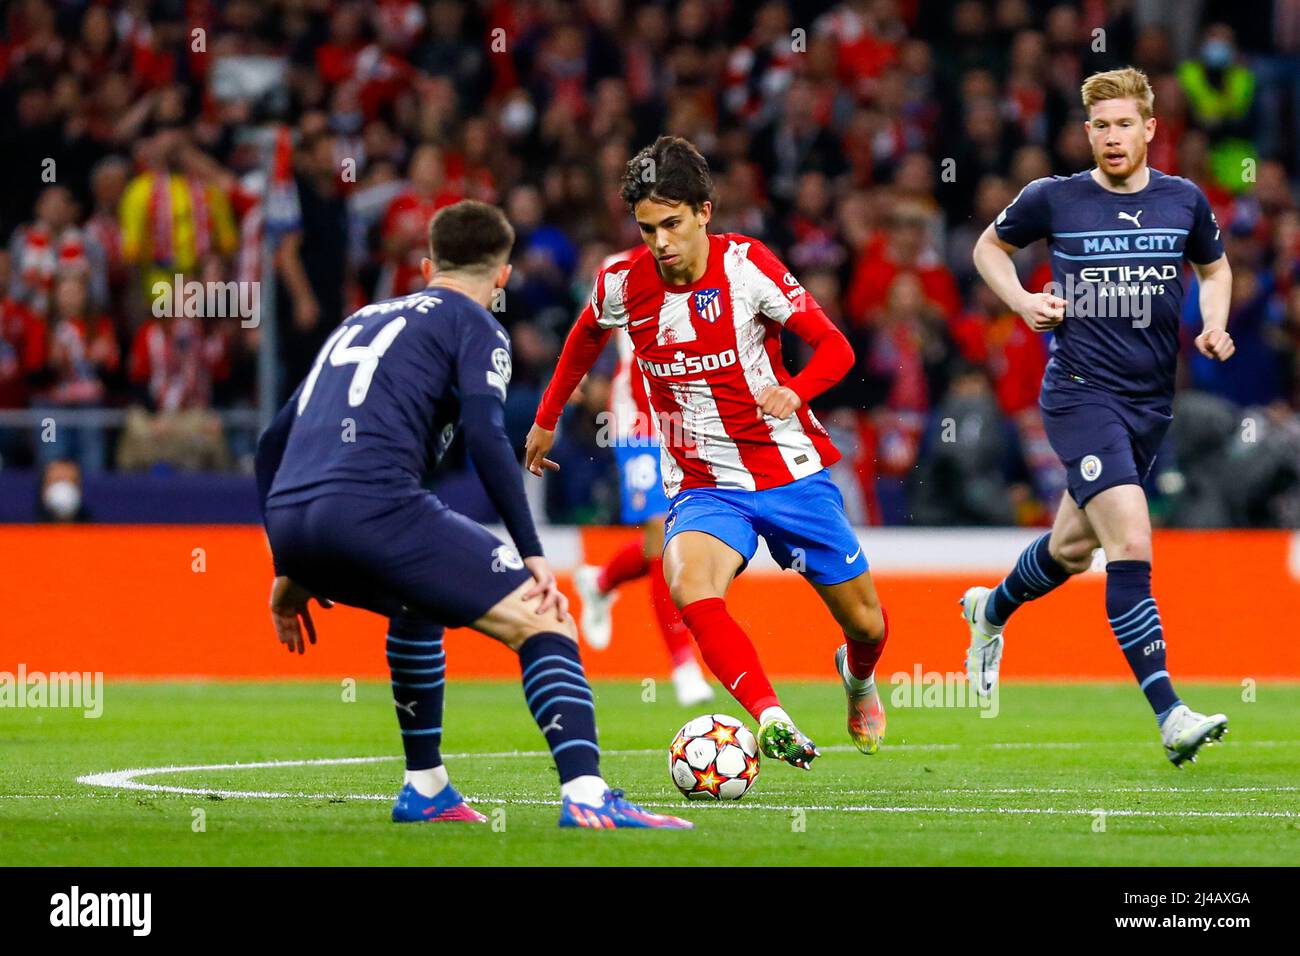 MADRID, SPAIN - APRIL 13: Joao Felix of Atletico Madrid during the UEFA Champions  League Quarter-Finals, Second Leg match between Atlético Madrid and  Manchester City at Wanda Metropolitano on April 13, 2022